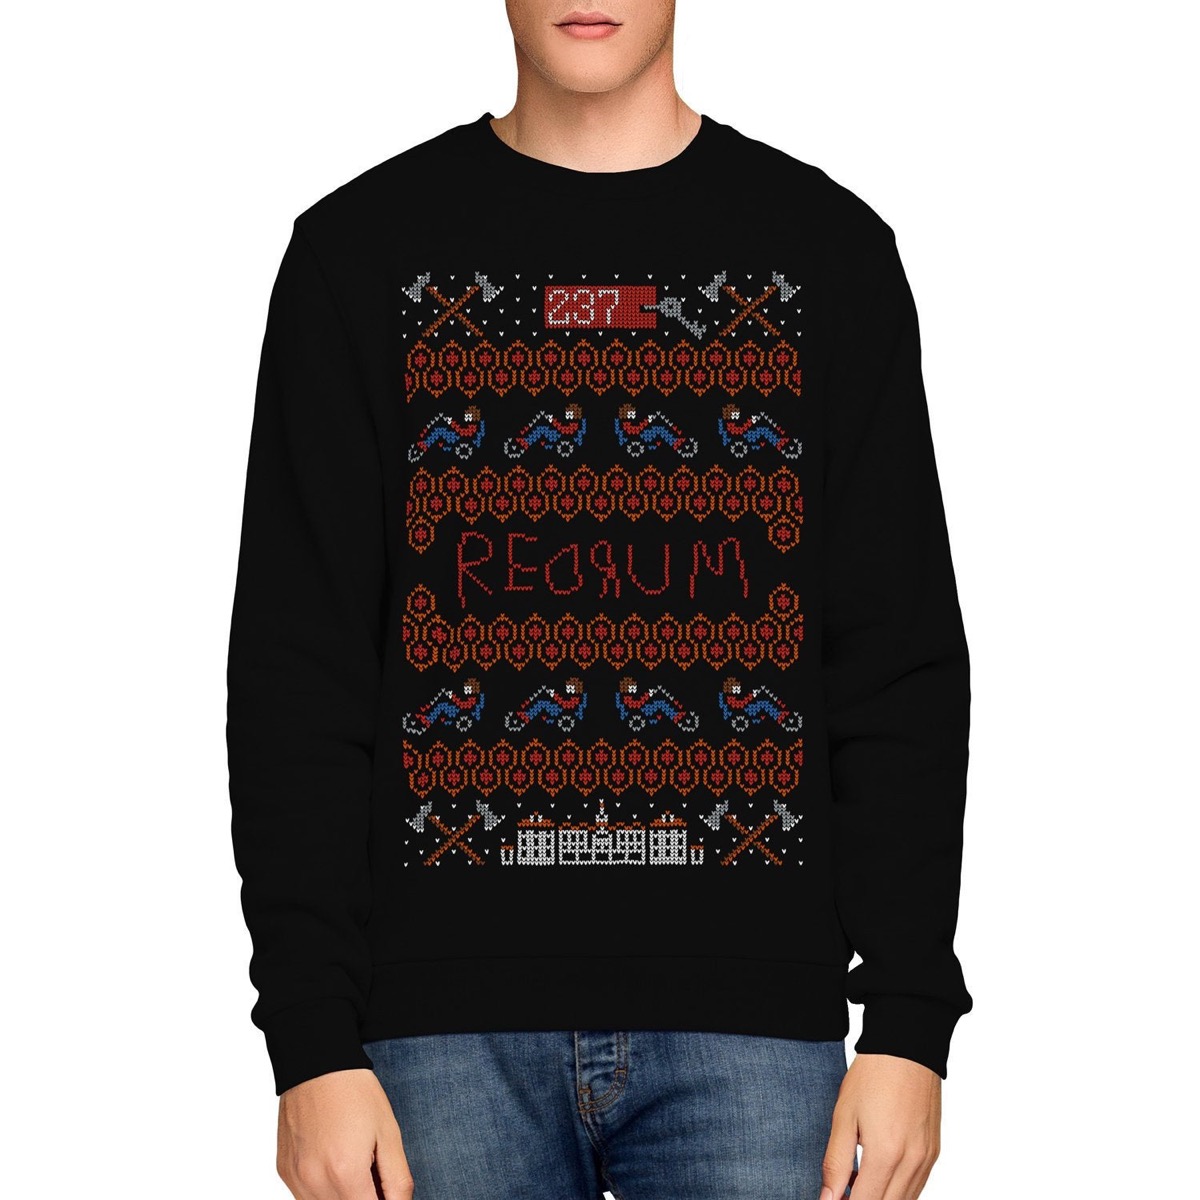 black christmas sweater with "redrum" in the center